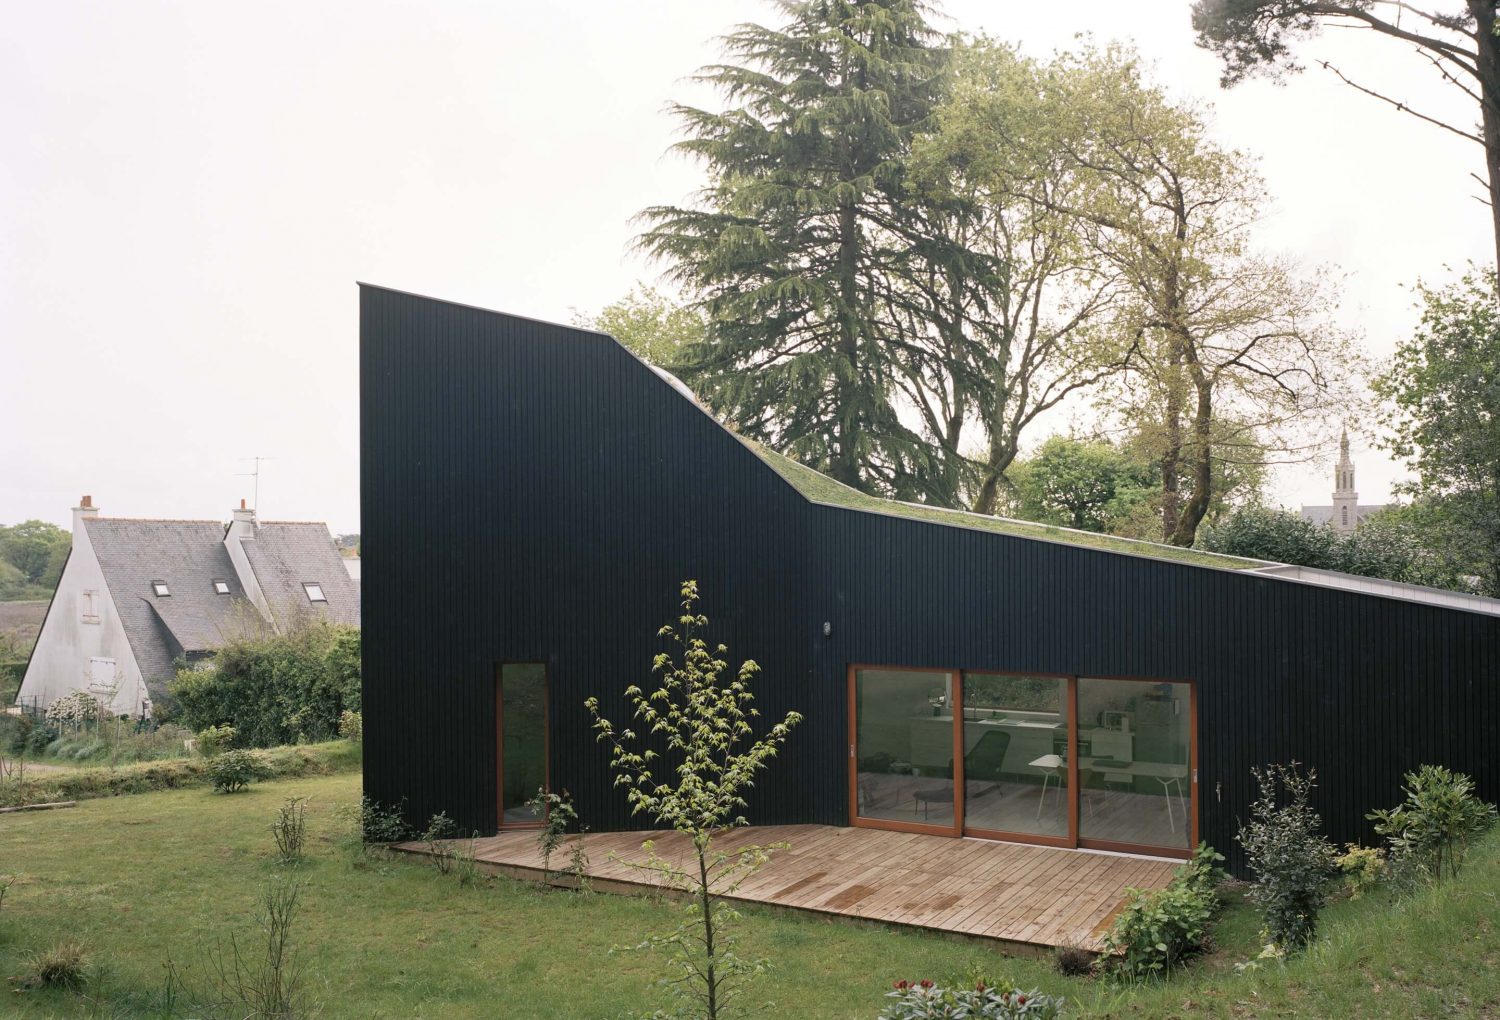 Holiday Home in France by Raum Architects